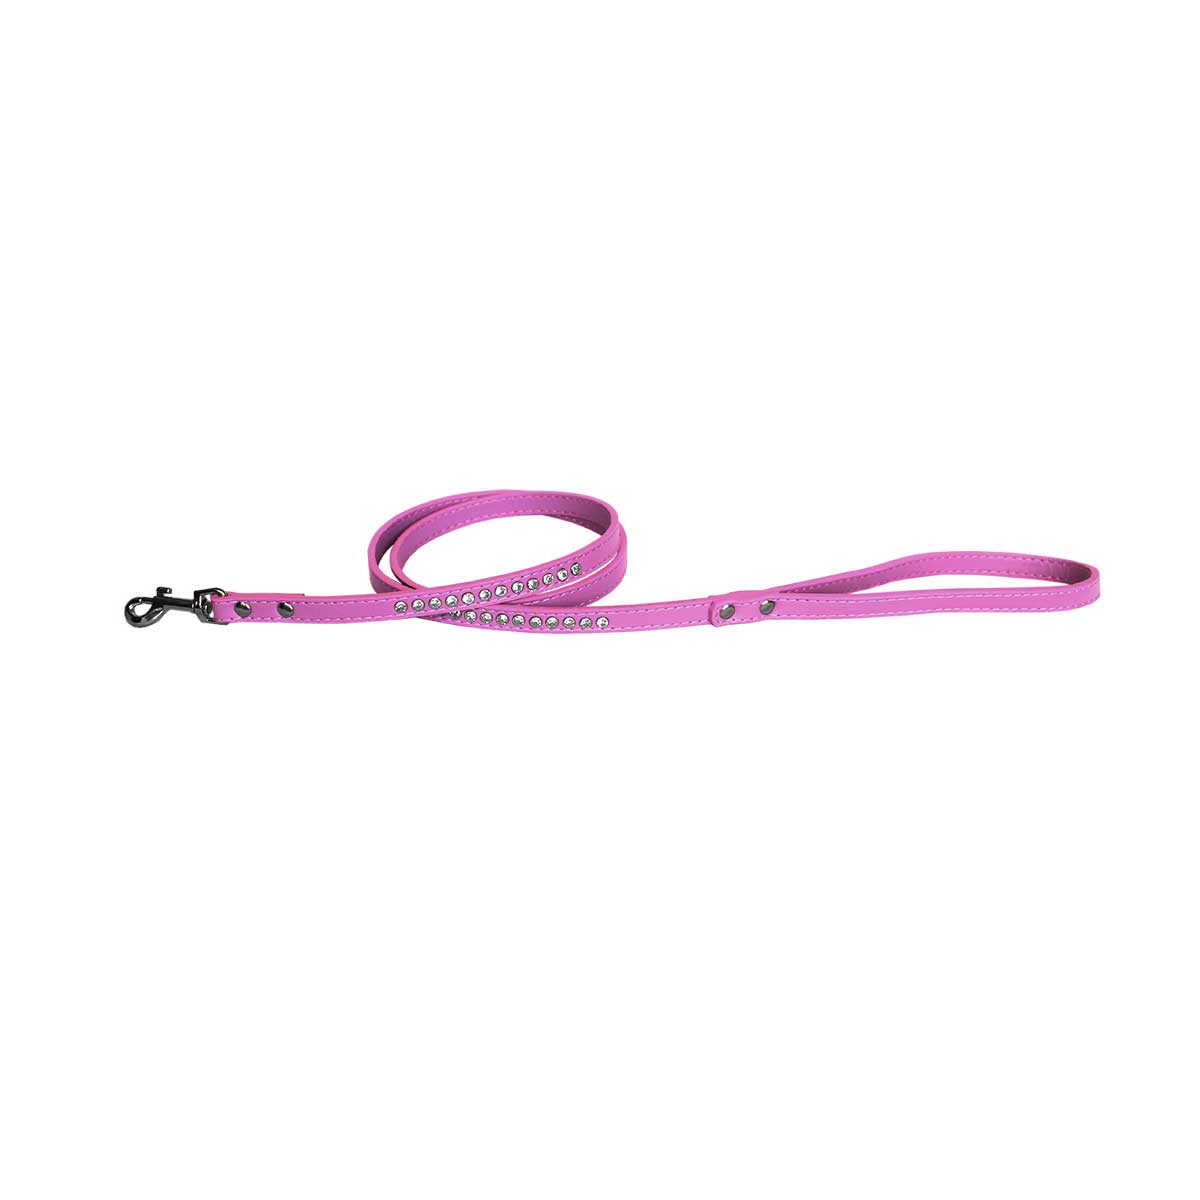 Clear Jewel Faux Leather Pet Leash in Bright Pink | Pawlicious & Company